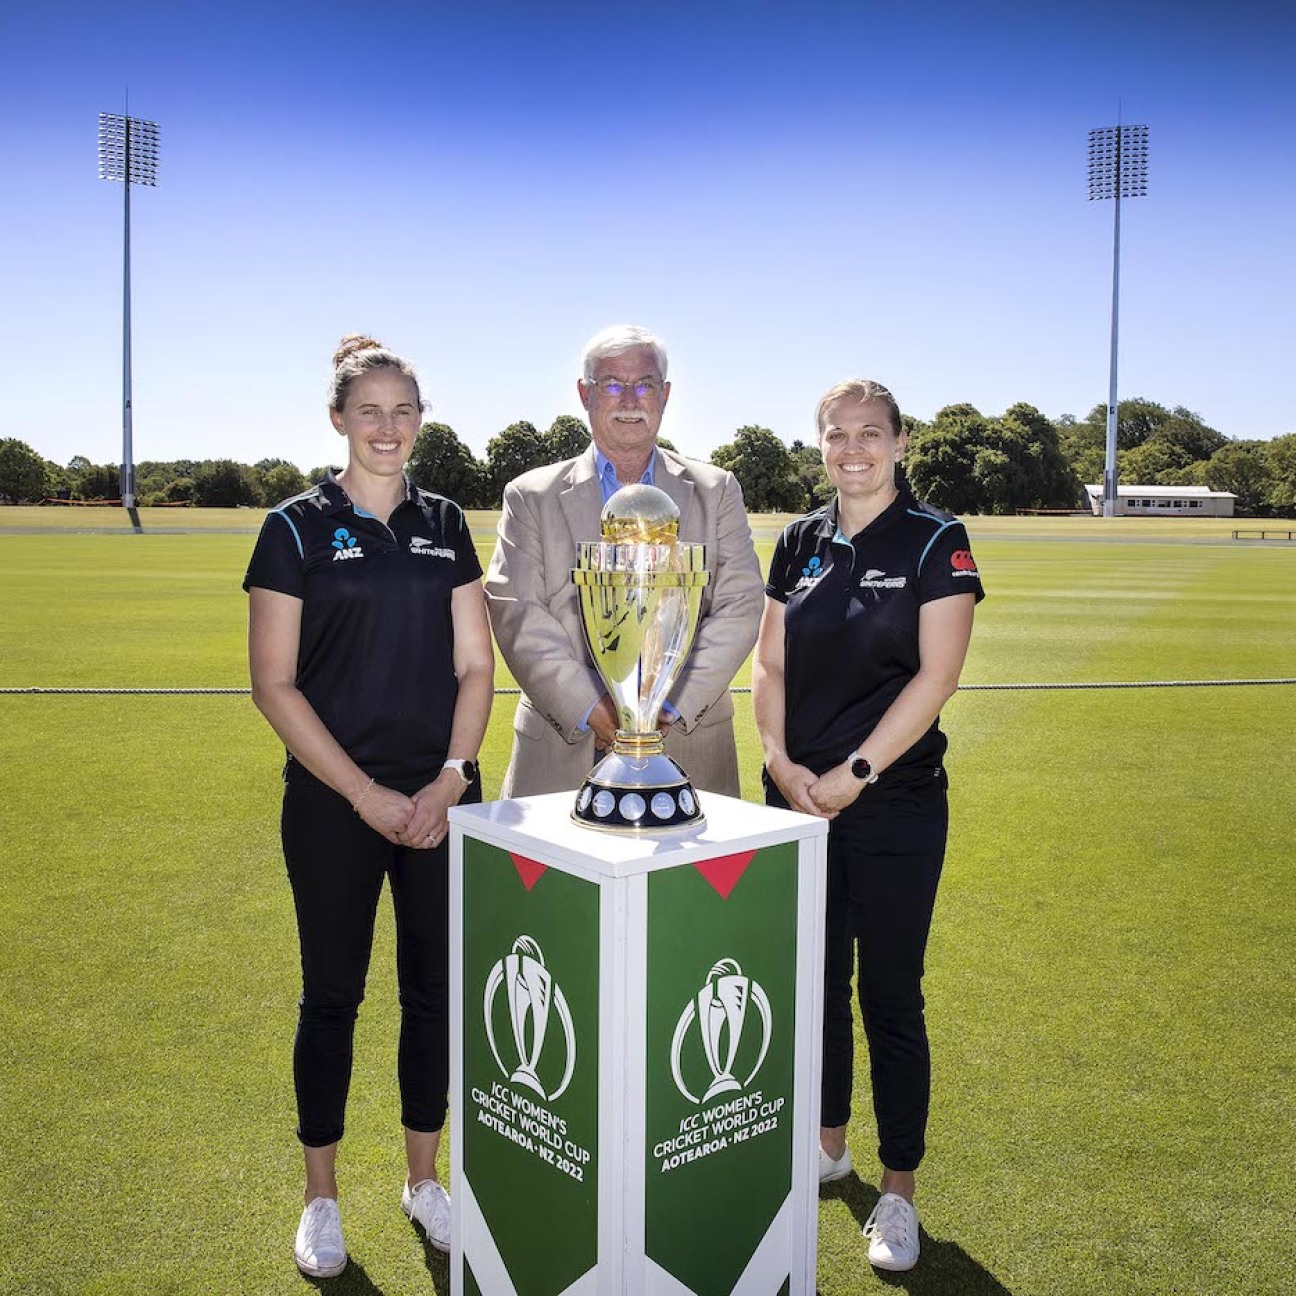 Schedule and fixtures of 2022 Women&#39;s ODI World Cup. Hosts New Zealand to  kick off tournament on March 4.